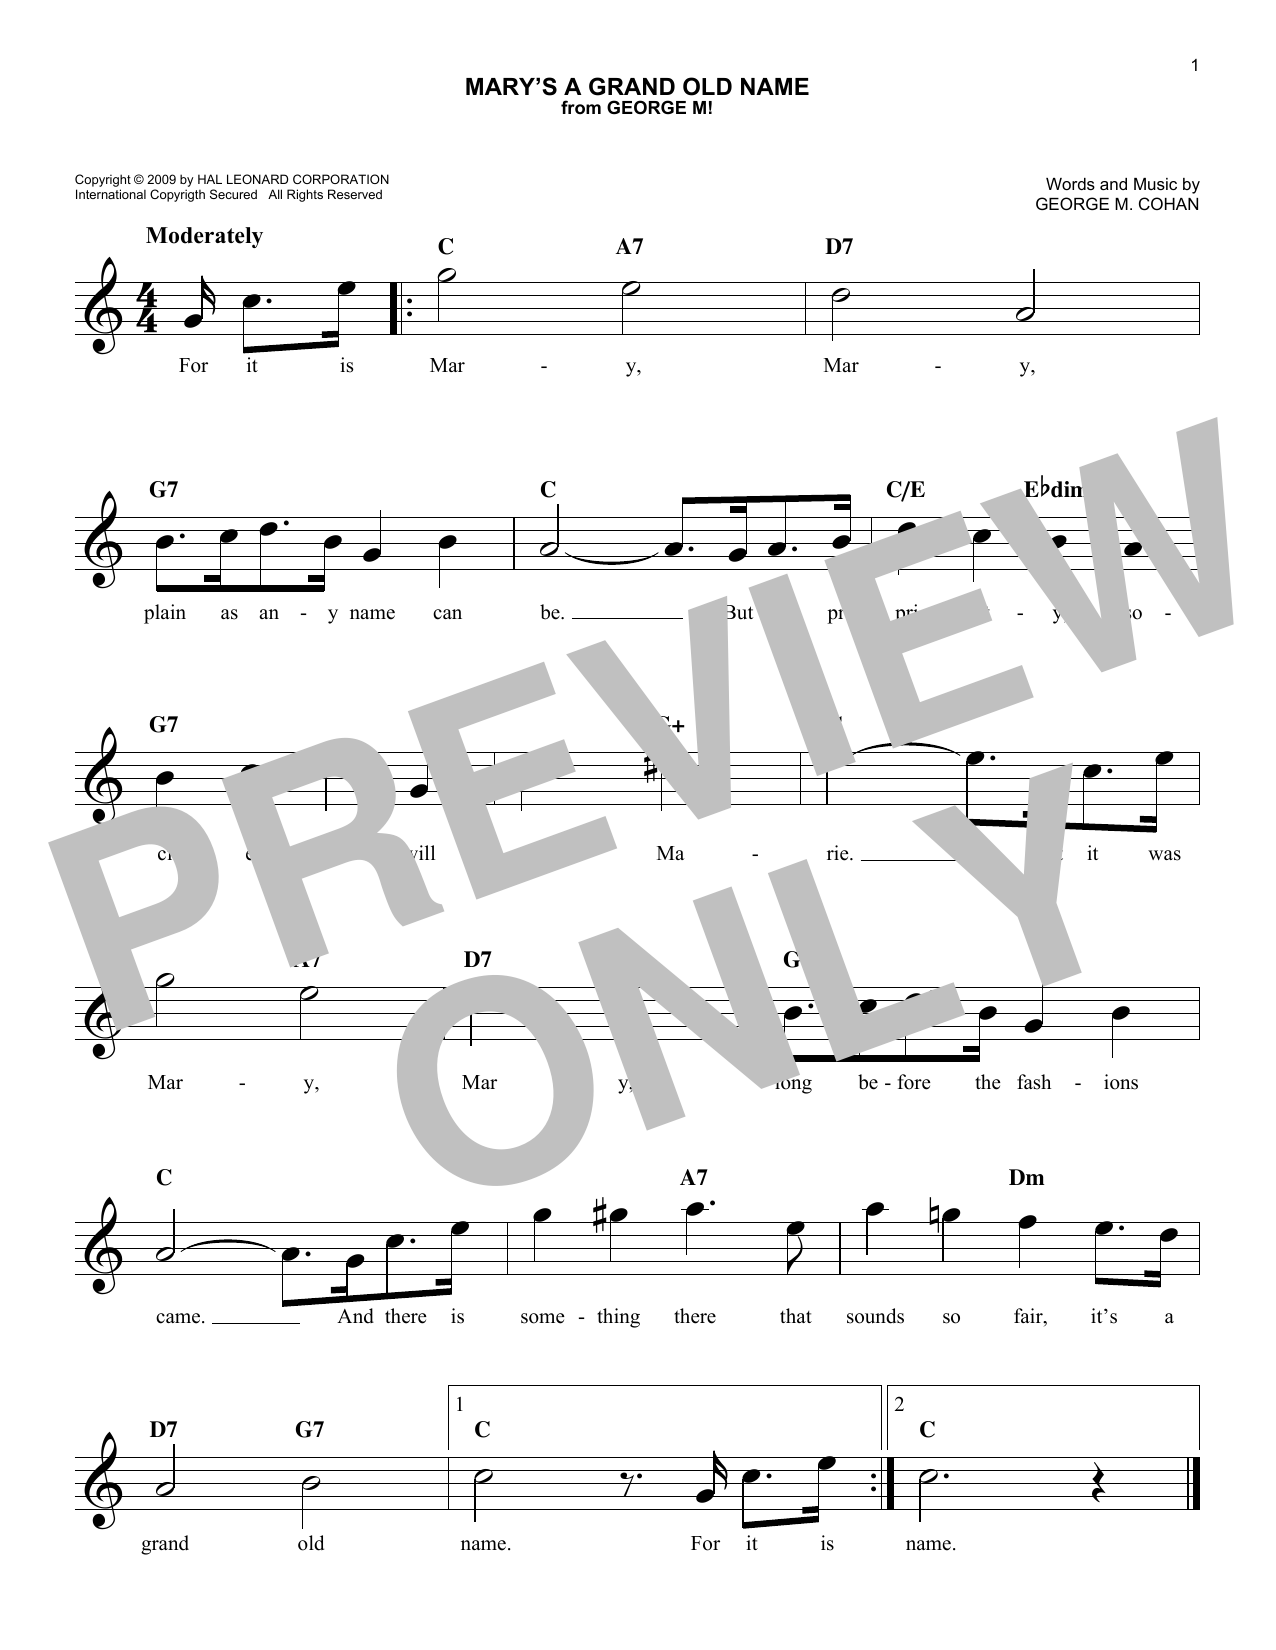 Download George M. Cohan Mary's A Grand Old Name Sheet Music